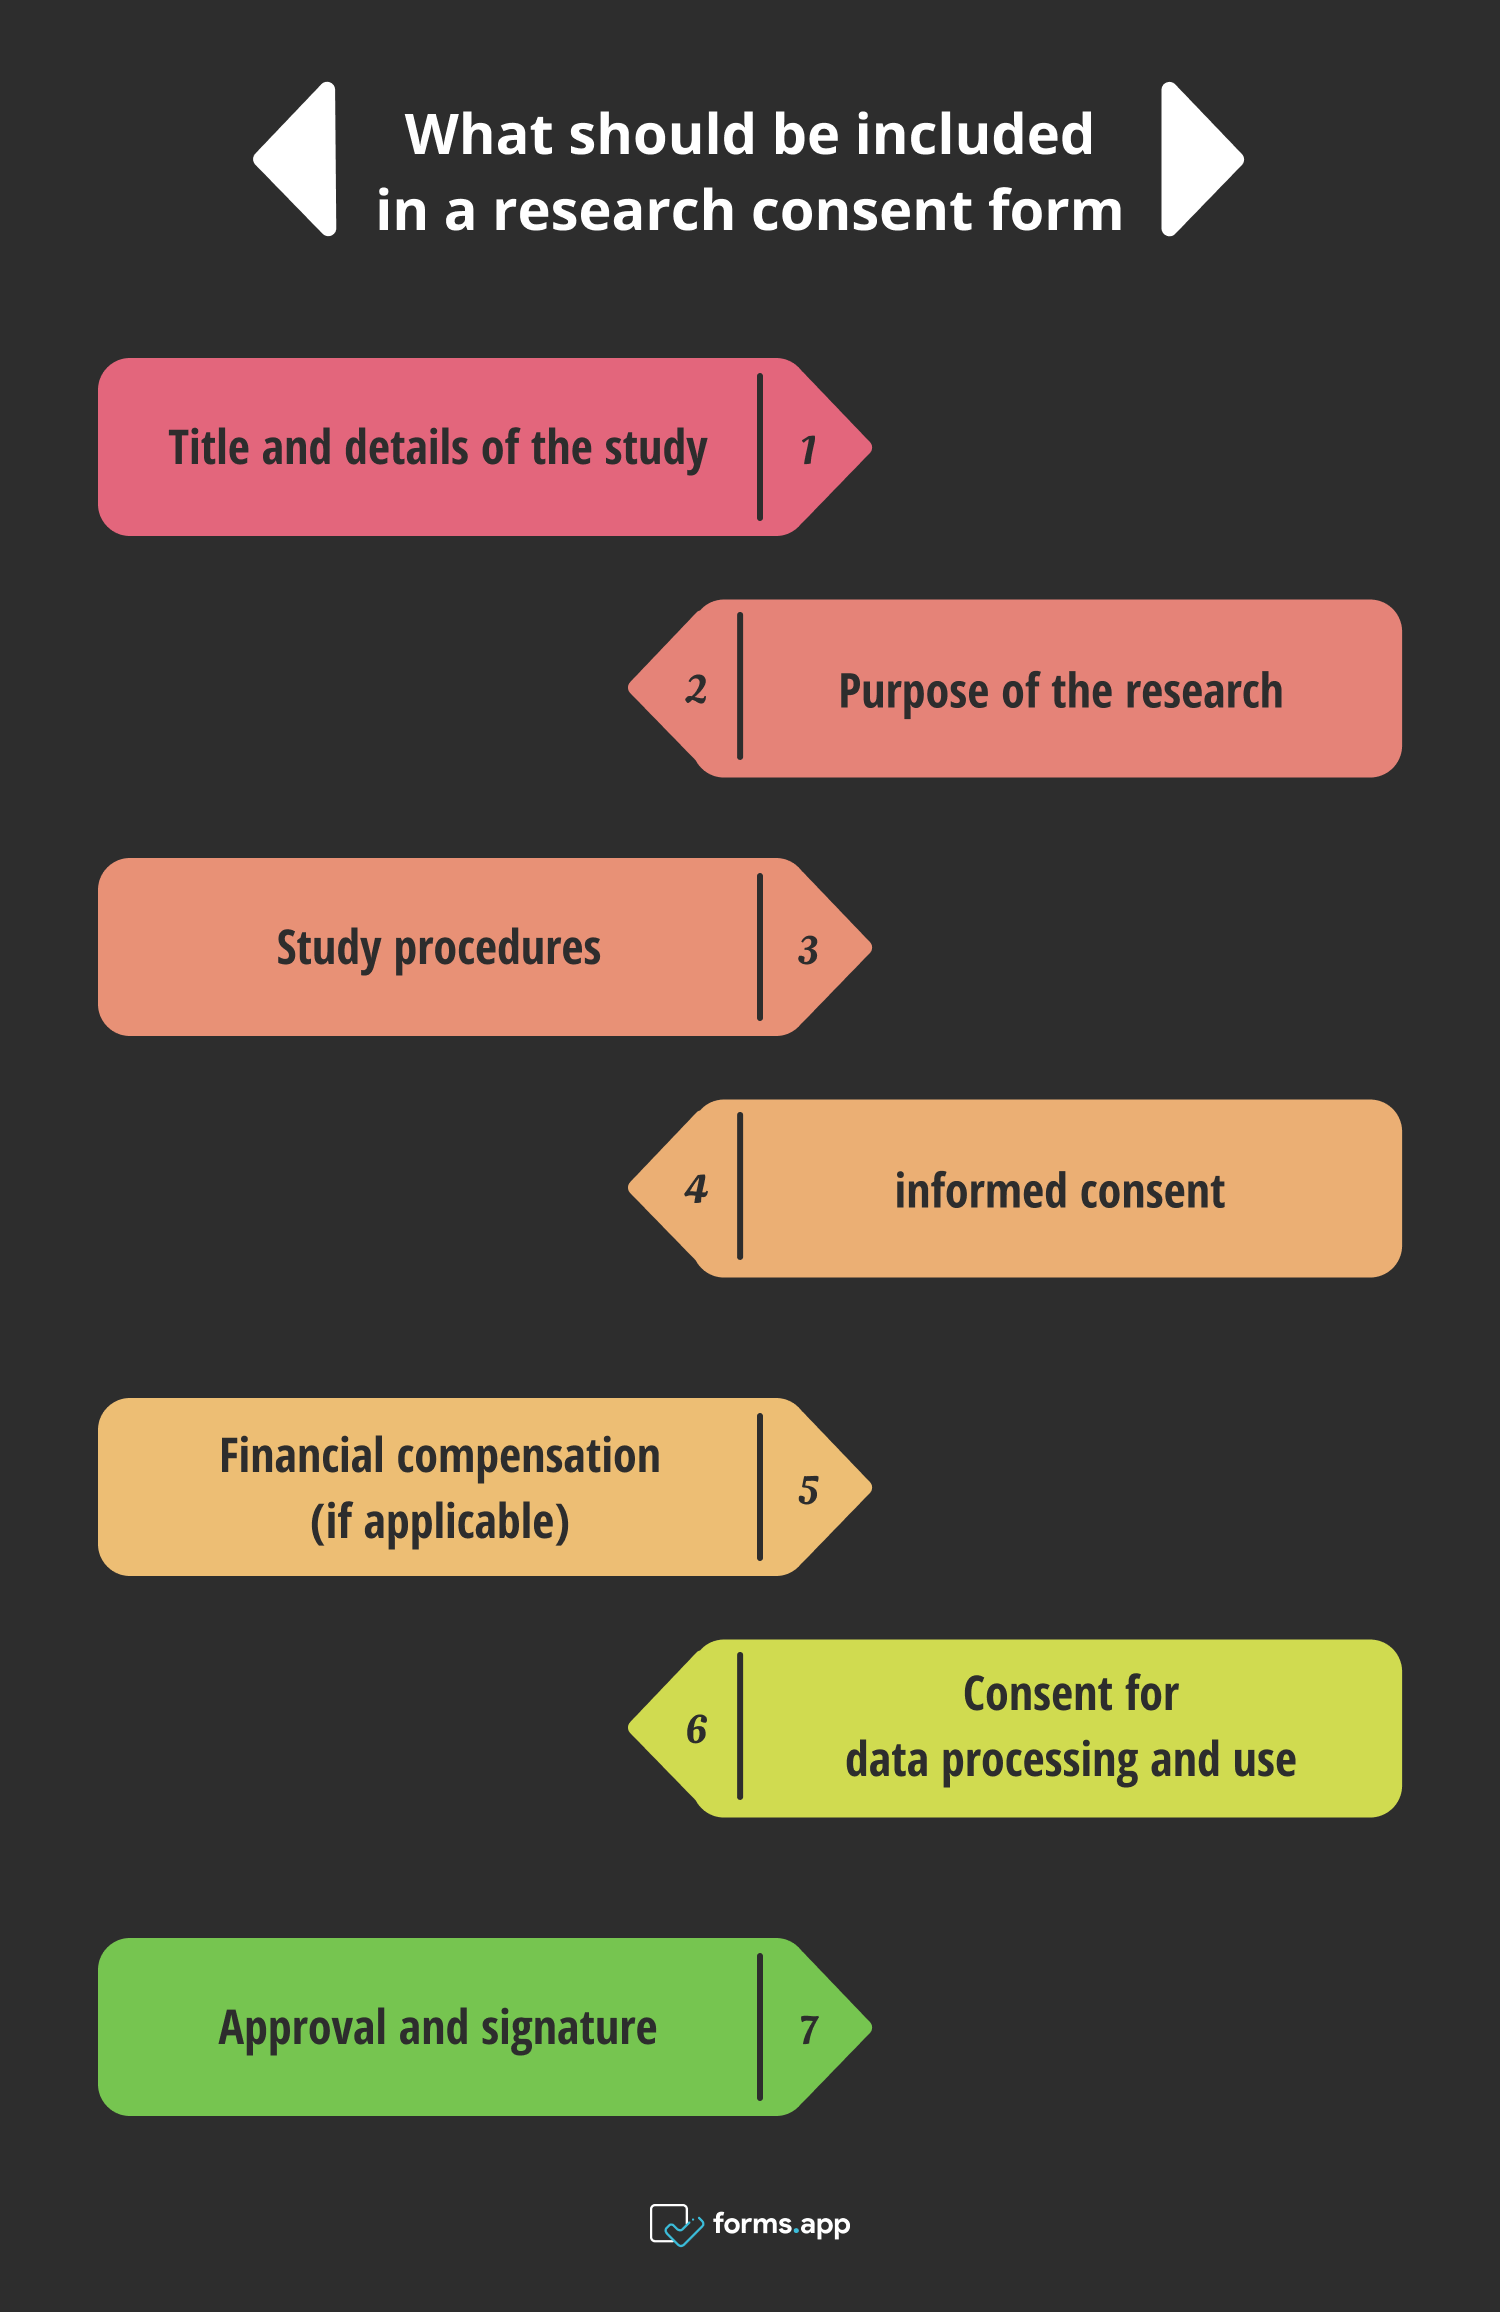 Things to consider while creating a research consent form